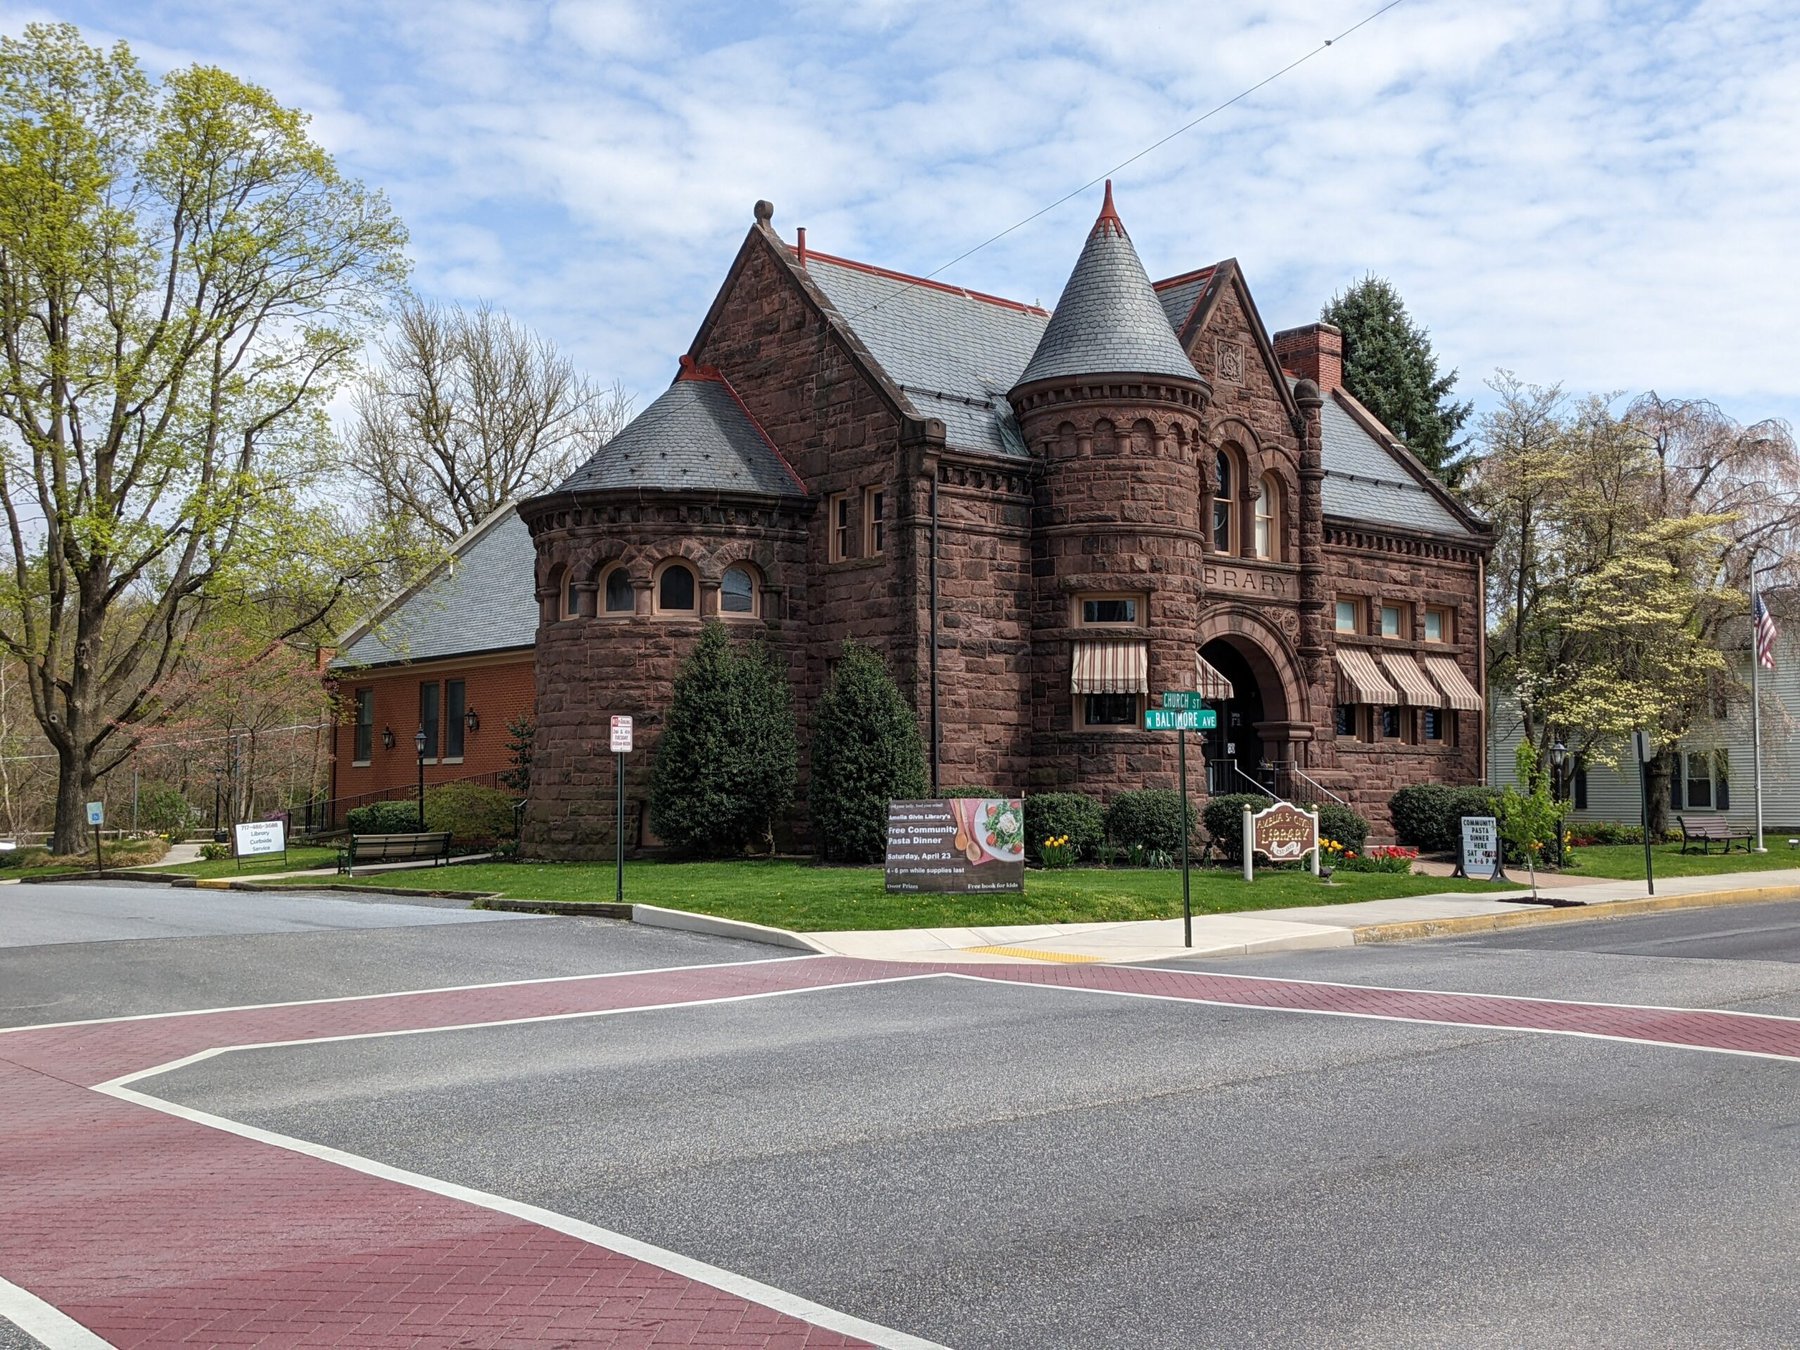 A photo featuring the exterior of the Amelia S. Givin Free Public Library in Mt. Holly Springs, Pennsylvania